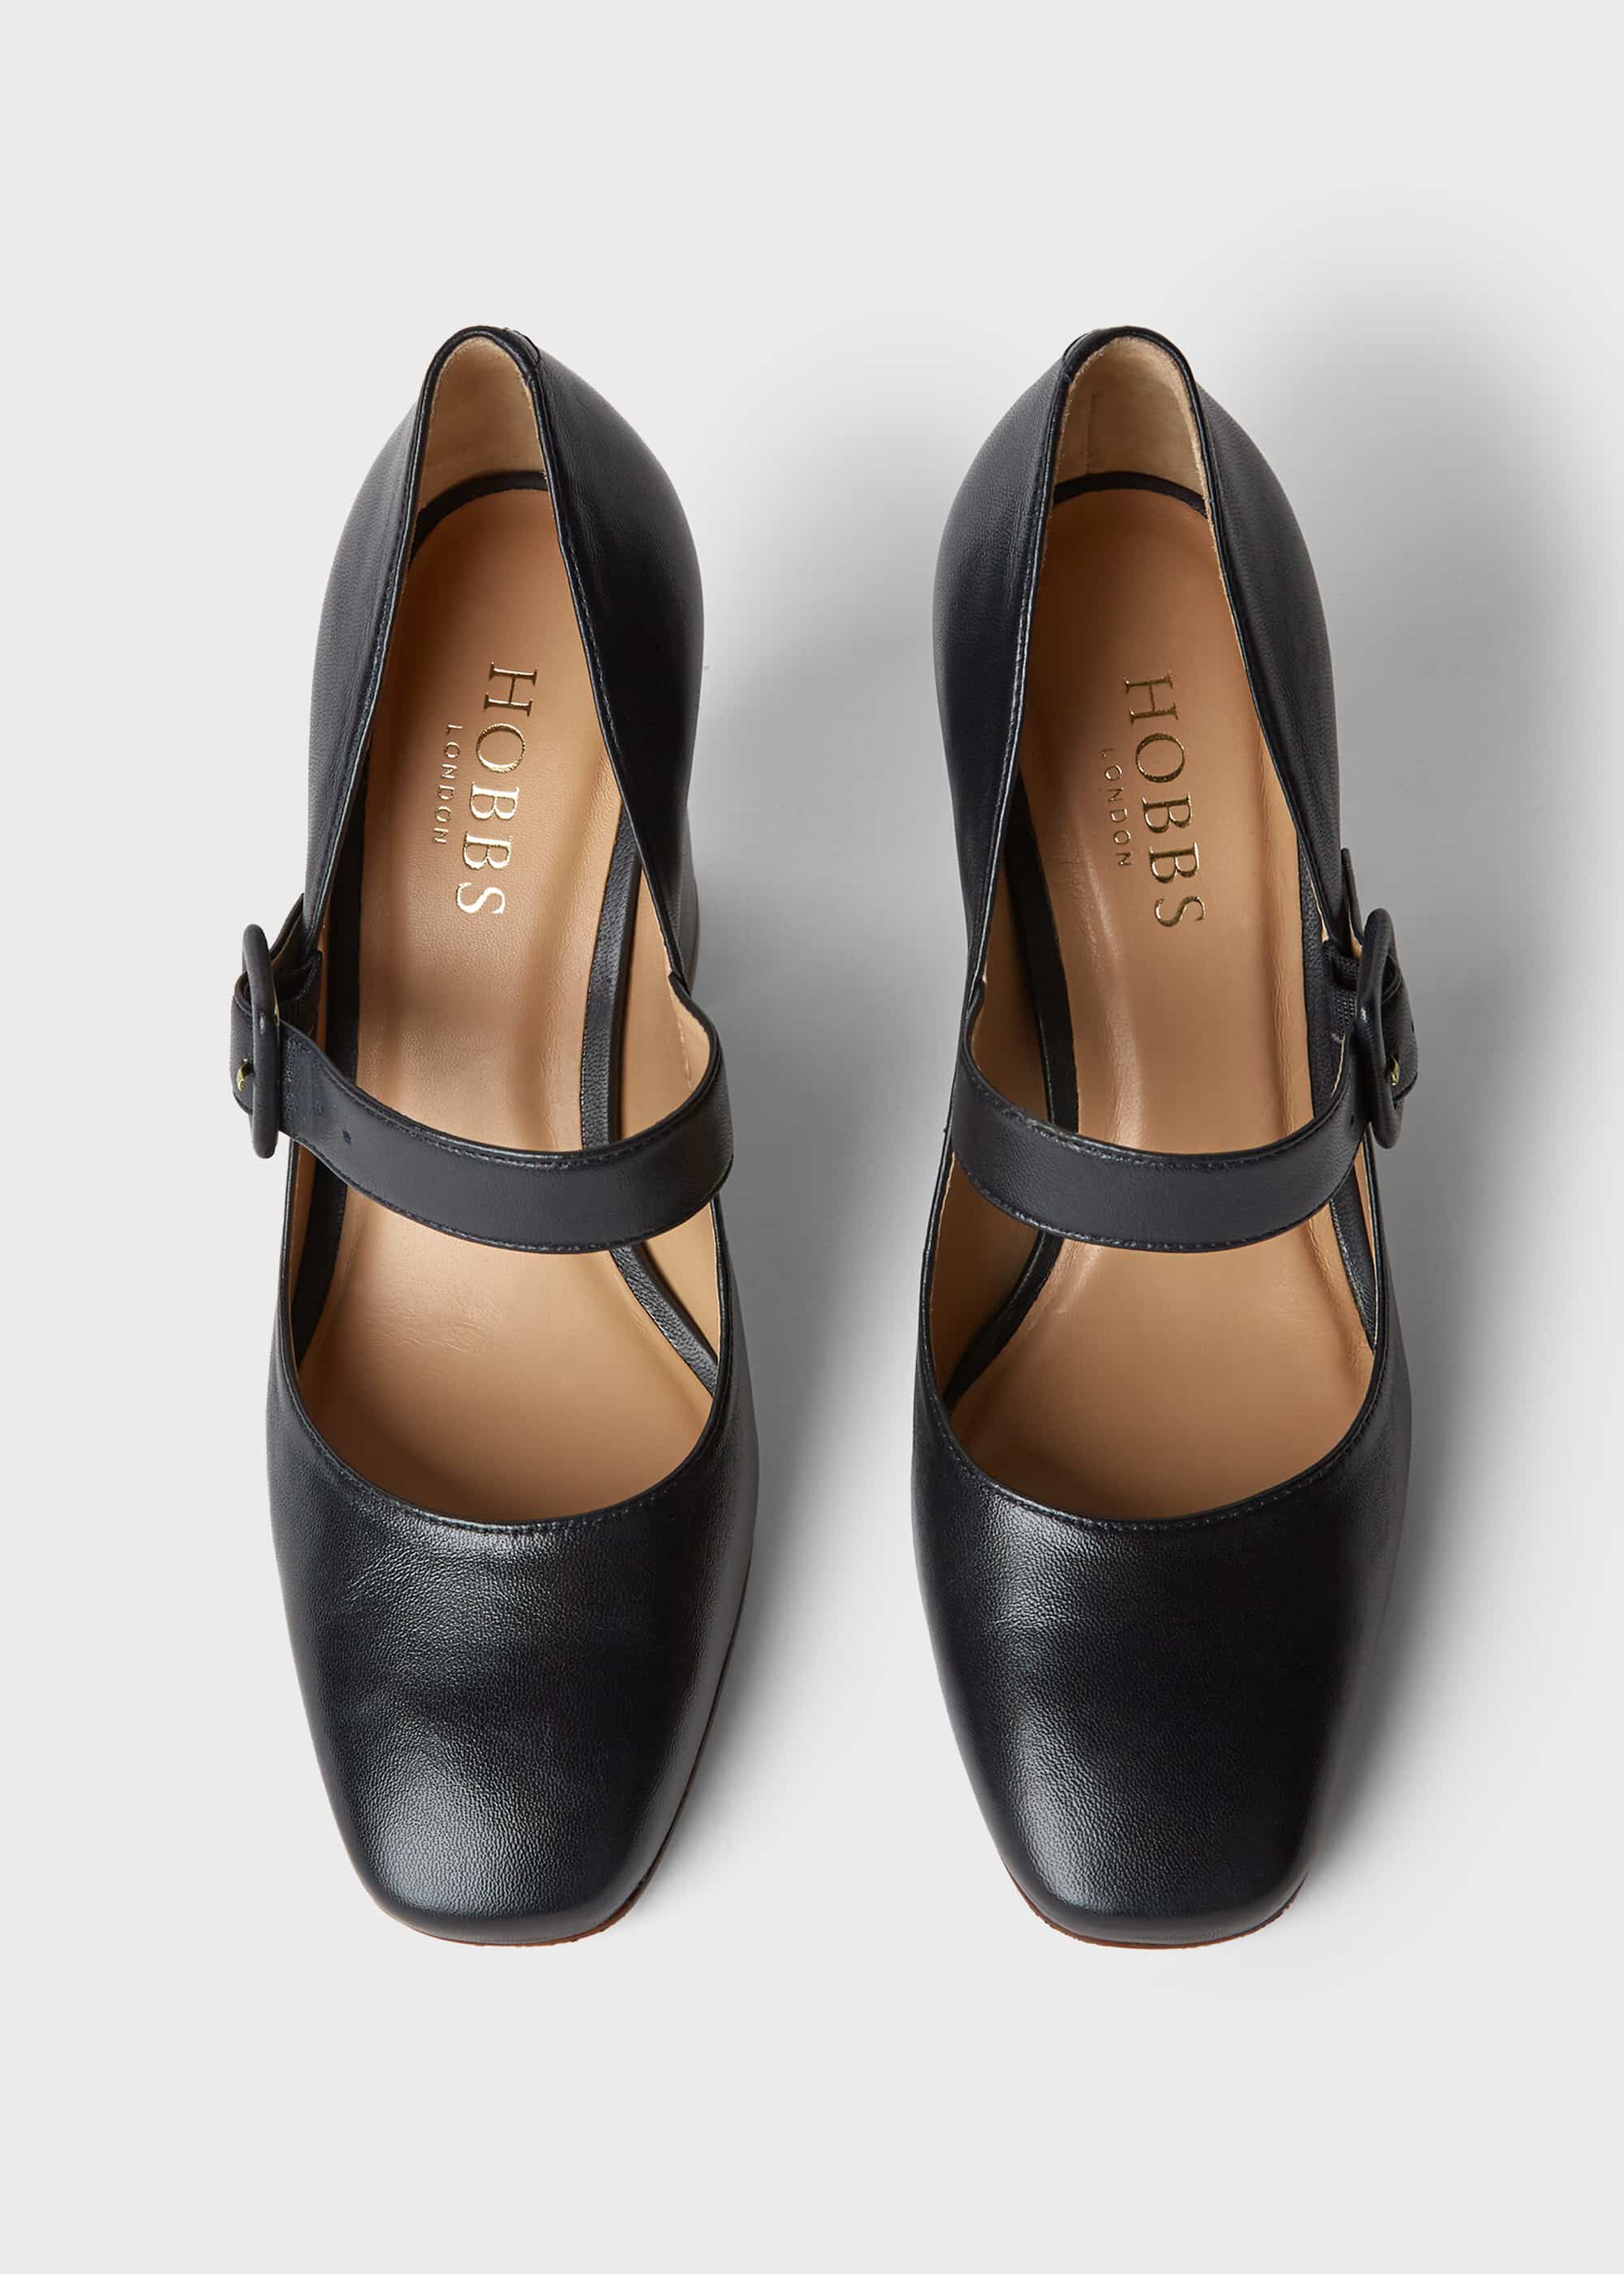 navy court shoes with strap